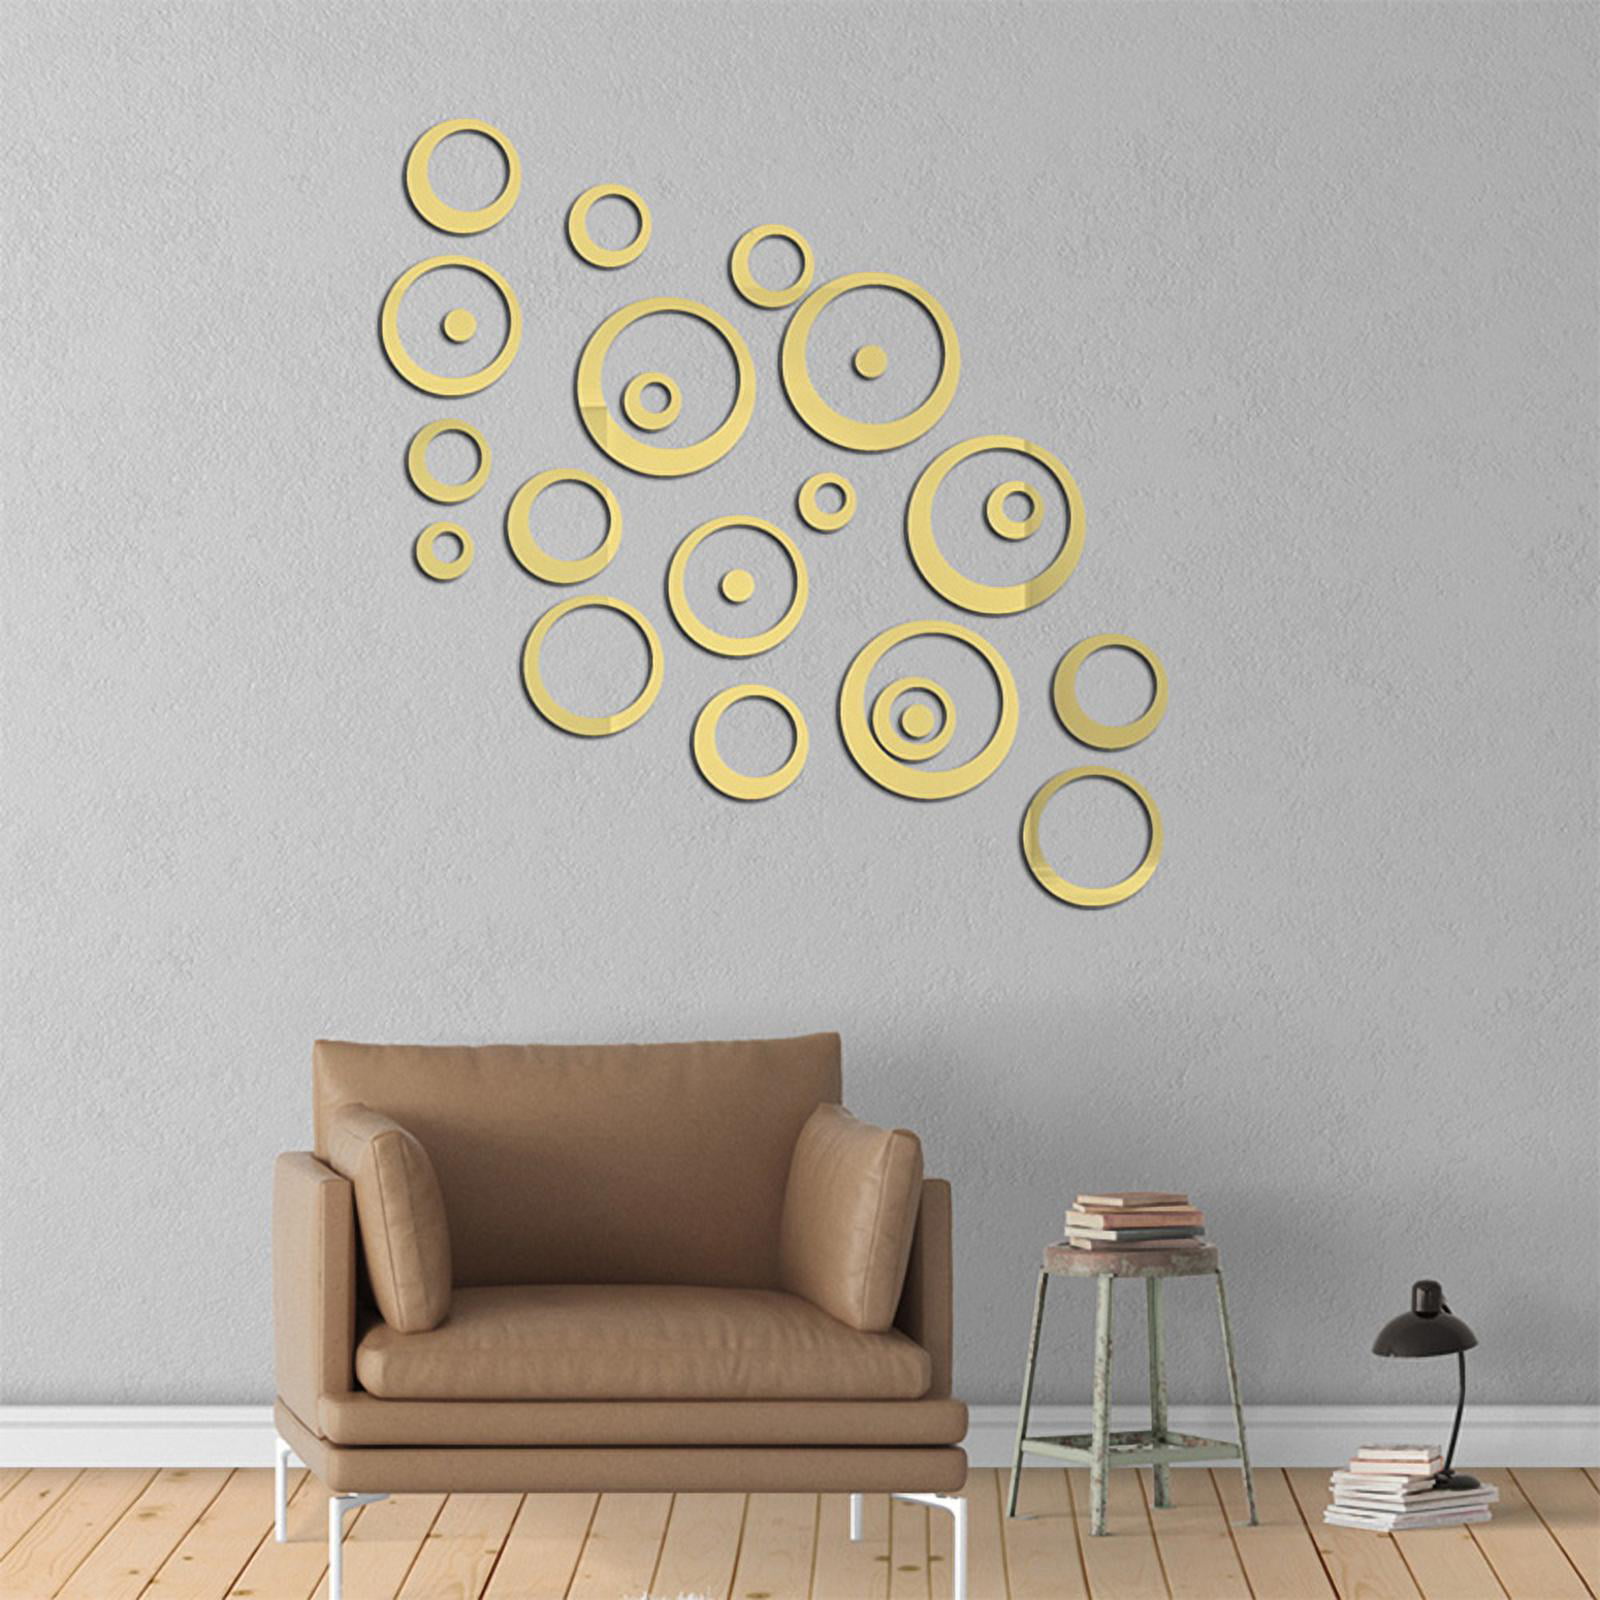 yubnlvae wall stickers (gold) and art craft stickers removable